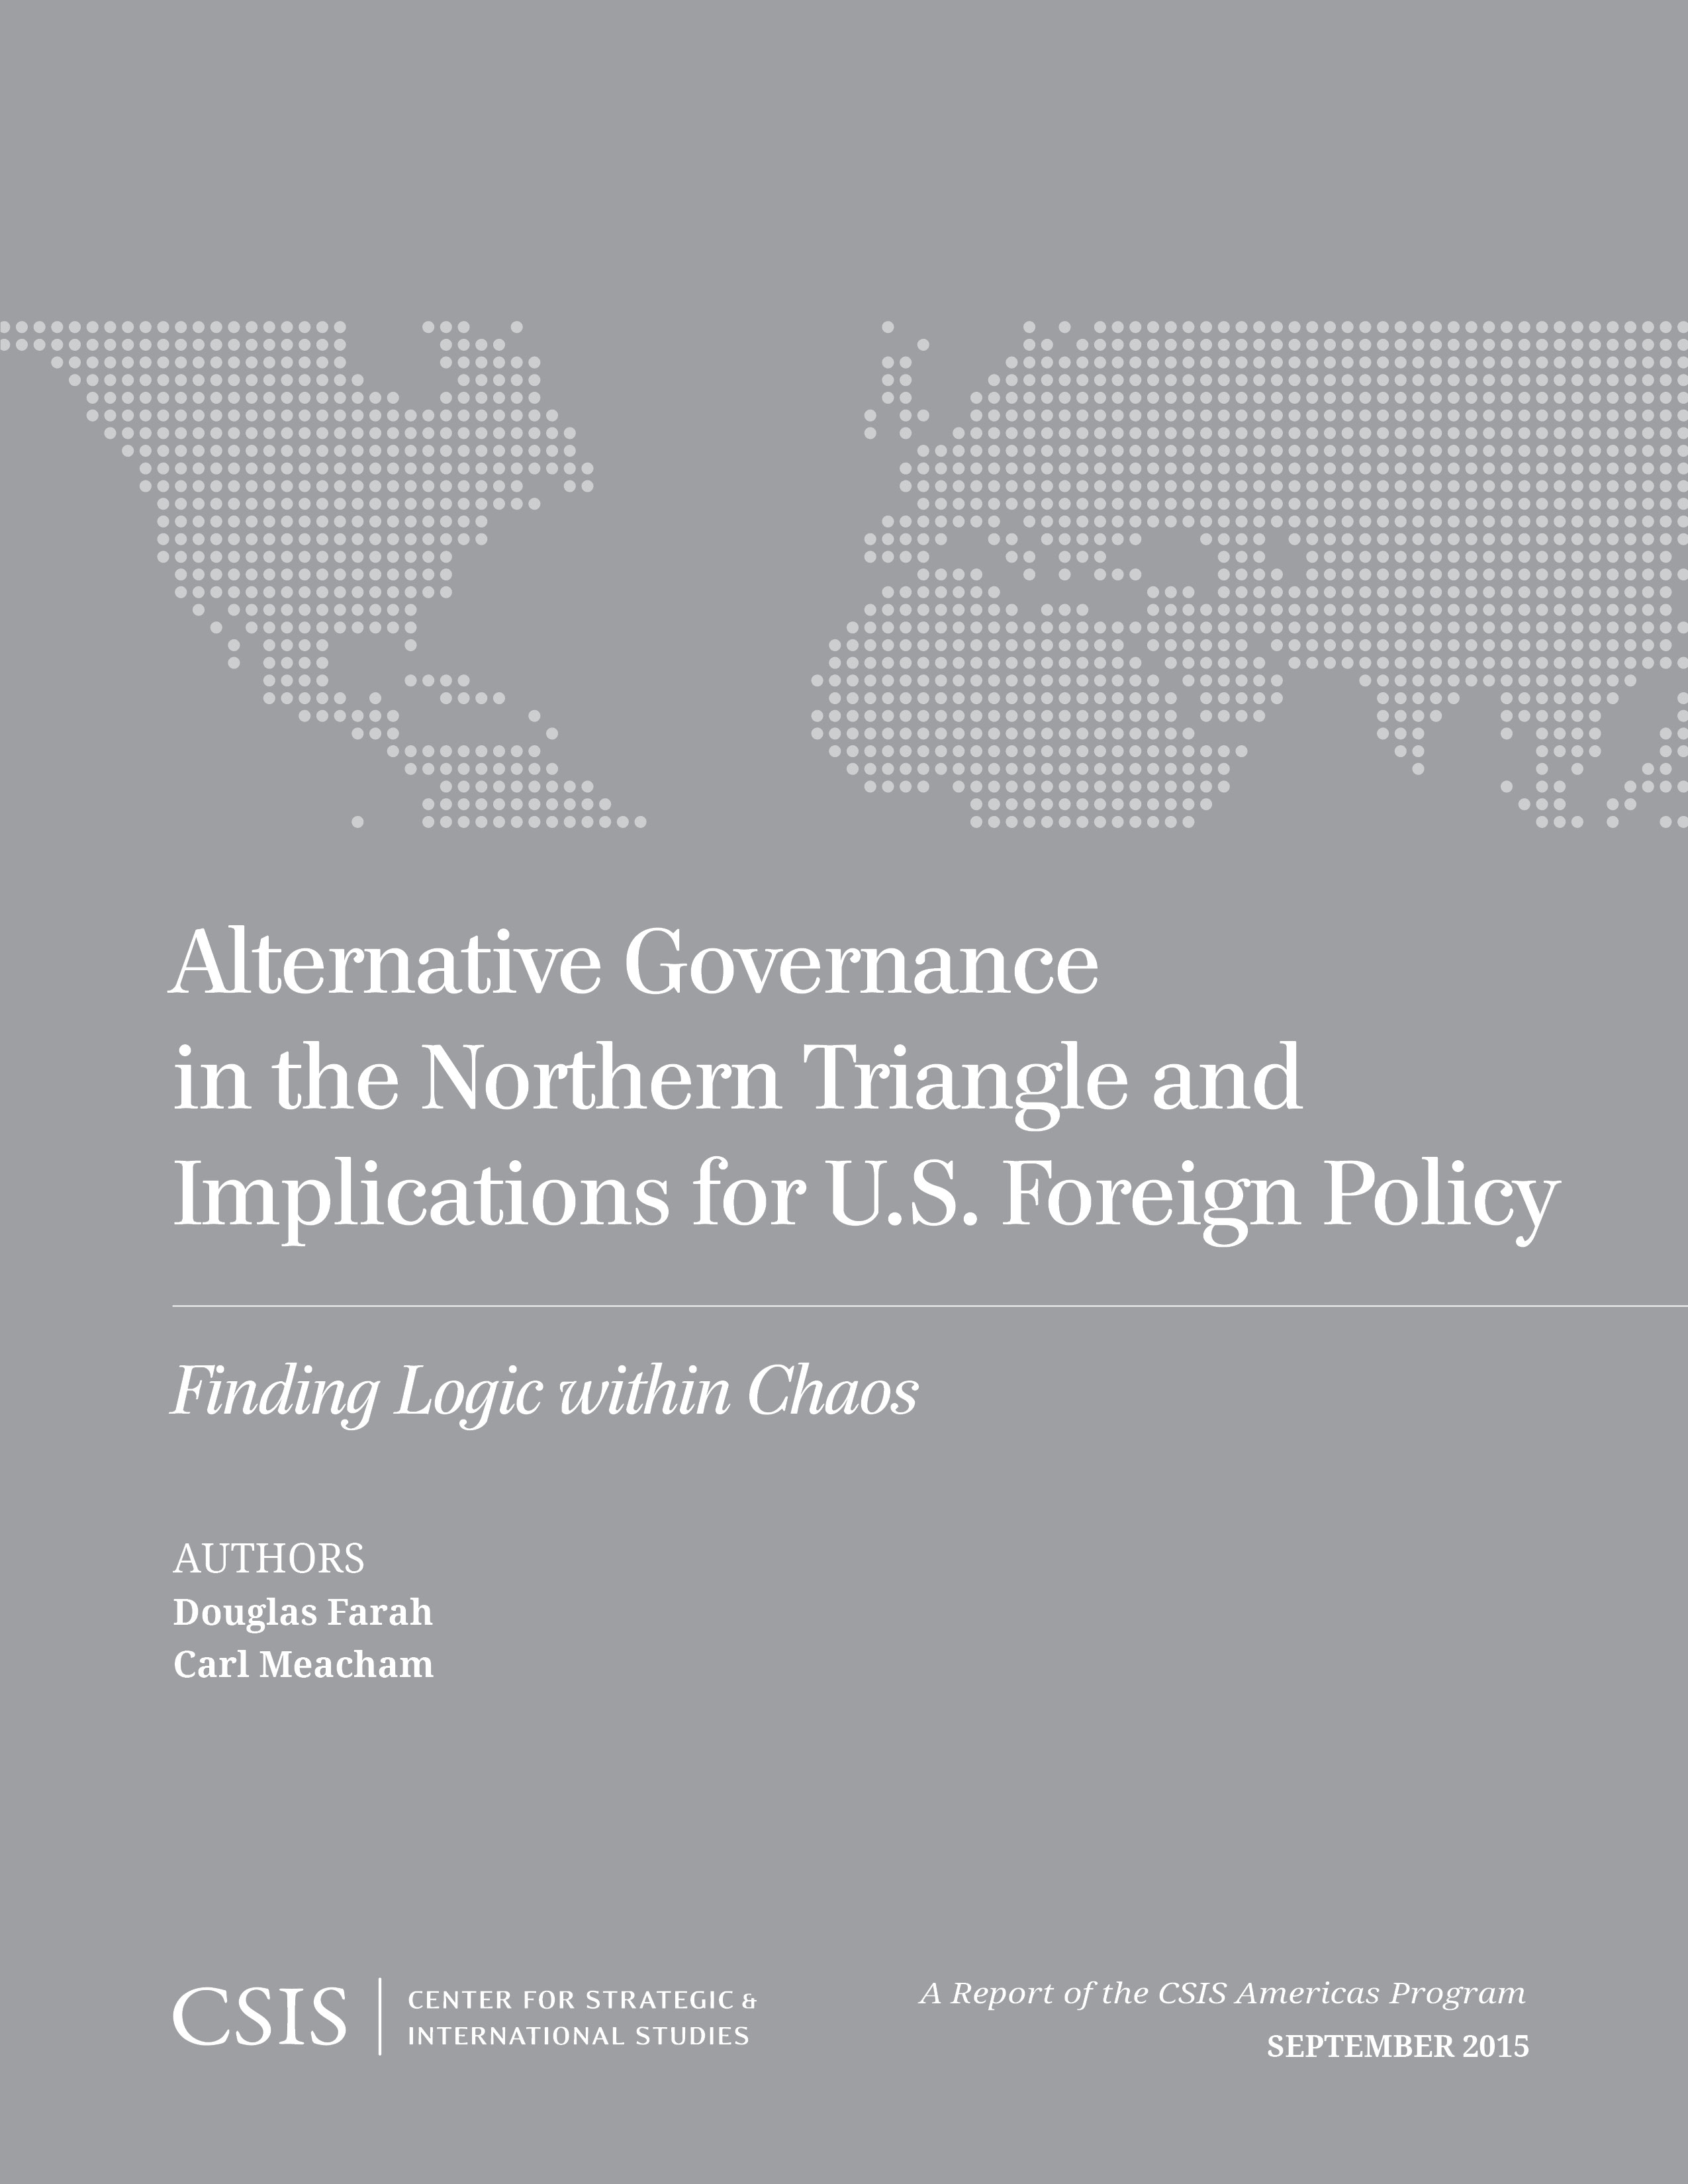 Alternative Governance in the Northern Triangle and Implications for U.S. Foreign Policy: Finding Logic within Chaos